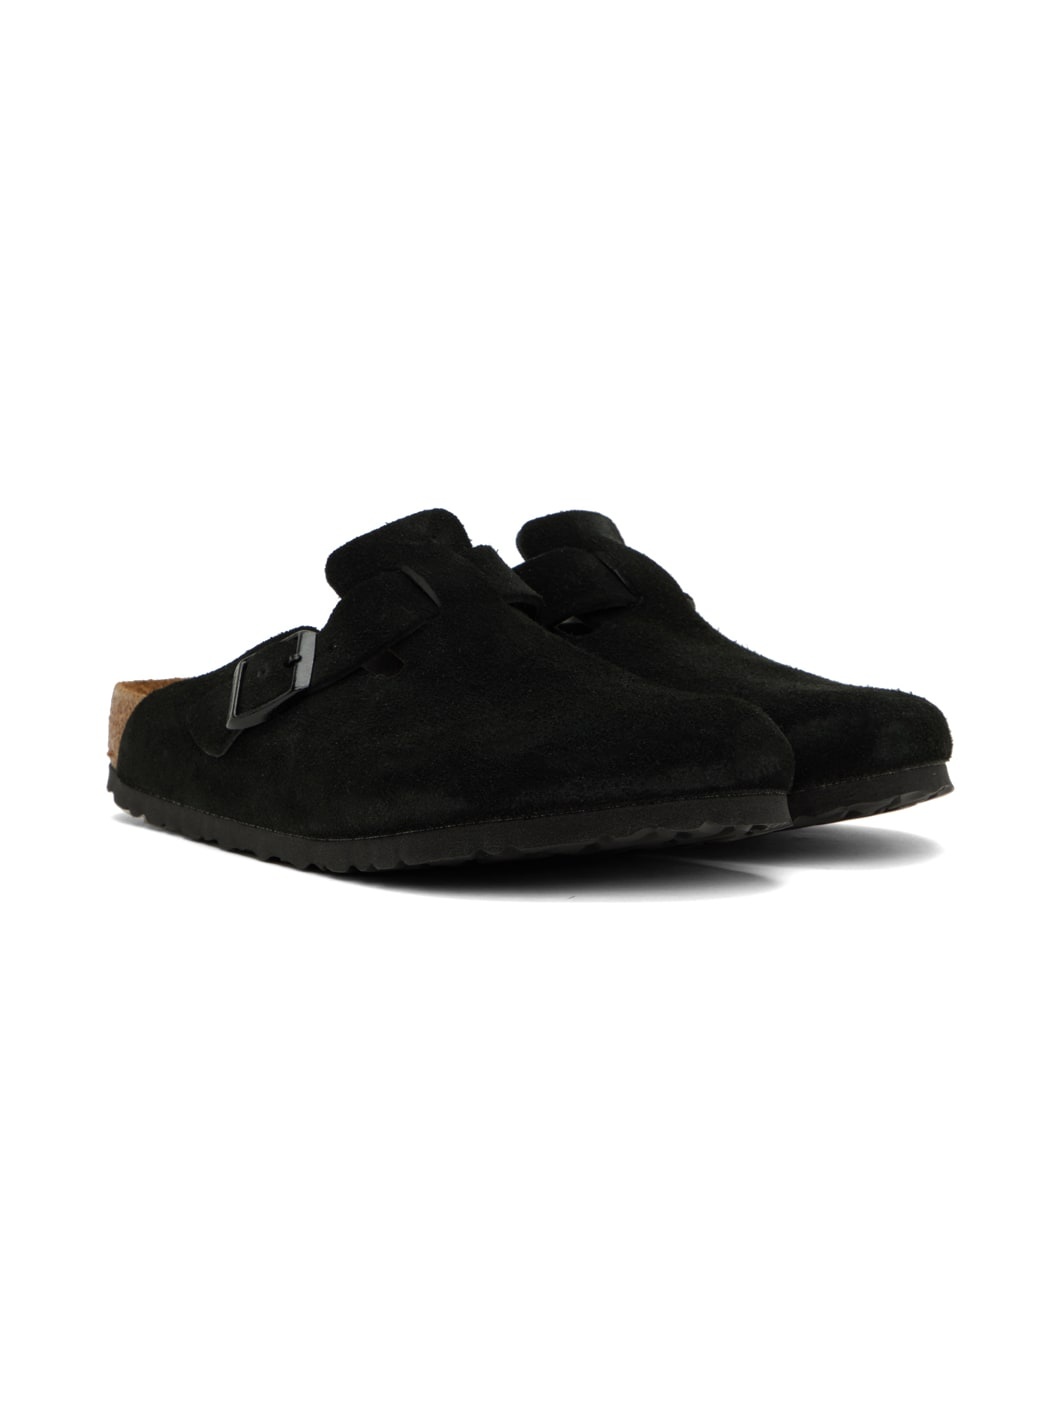 Black Boston Soft Footbed Loafers - 4